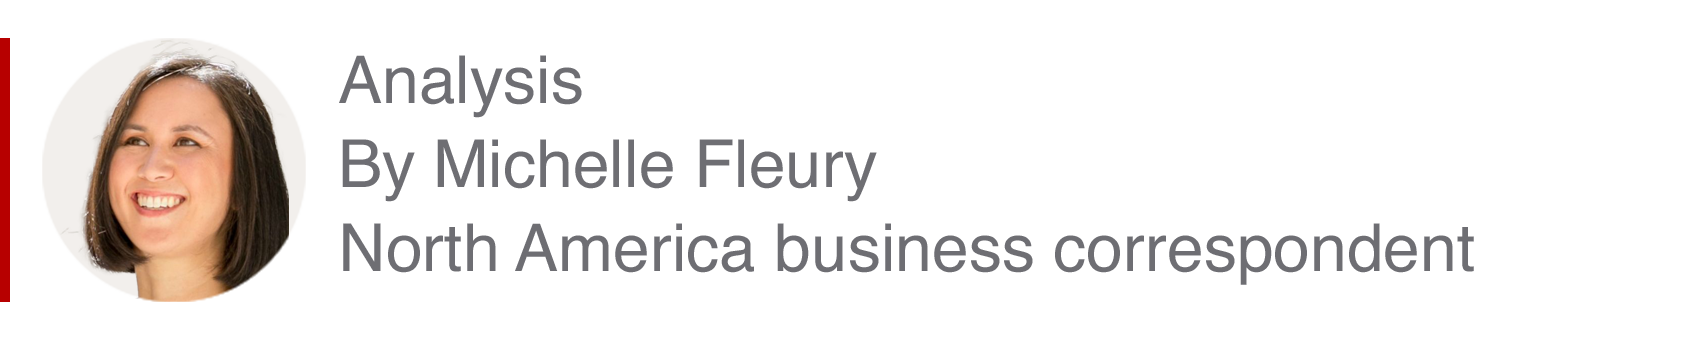 Analysis box by Michelle Fleury, North America business editor